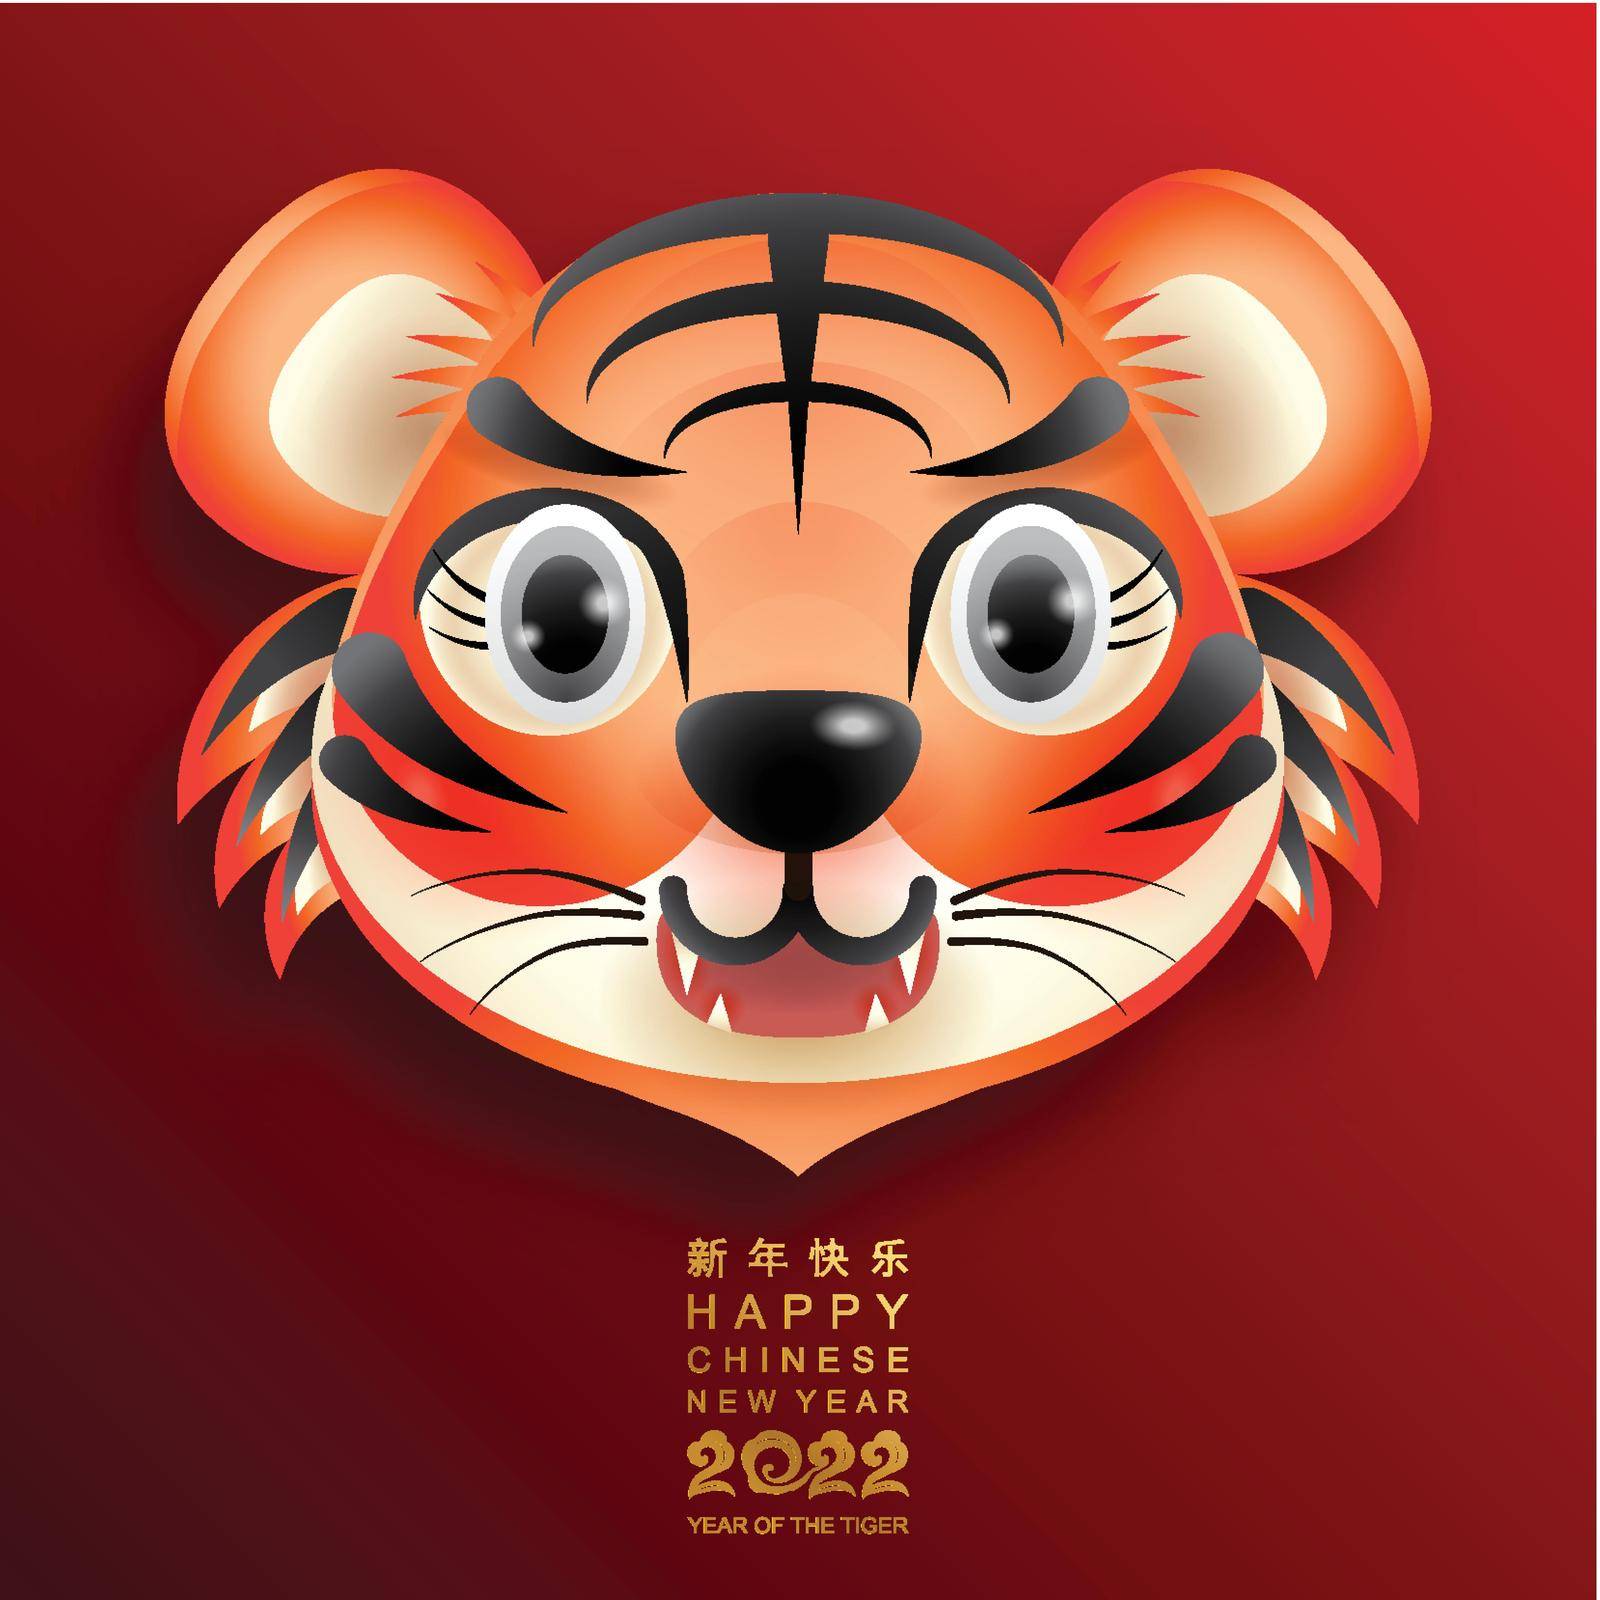 Chinese new year 2022 year of the tiger by SiamVector